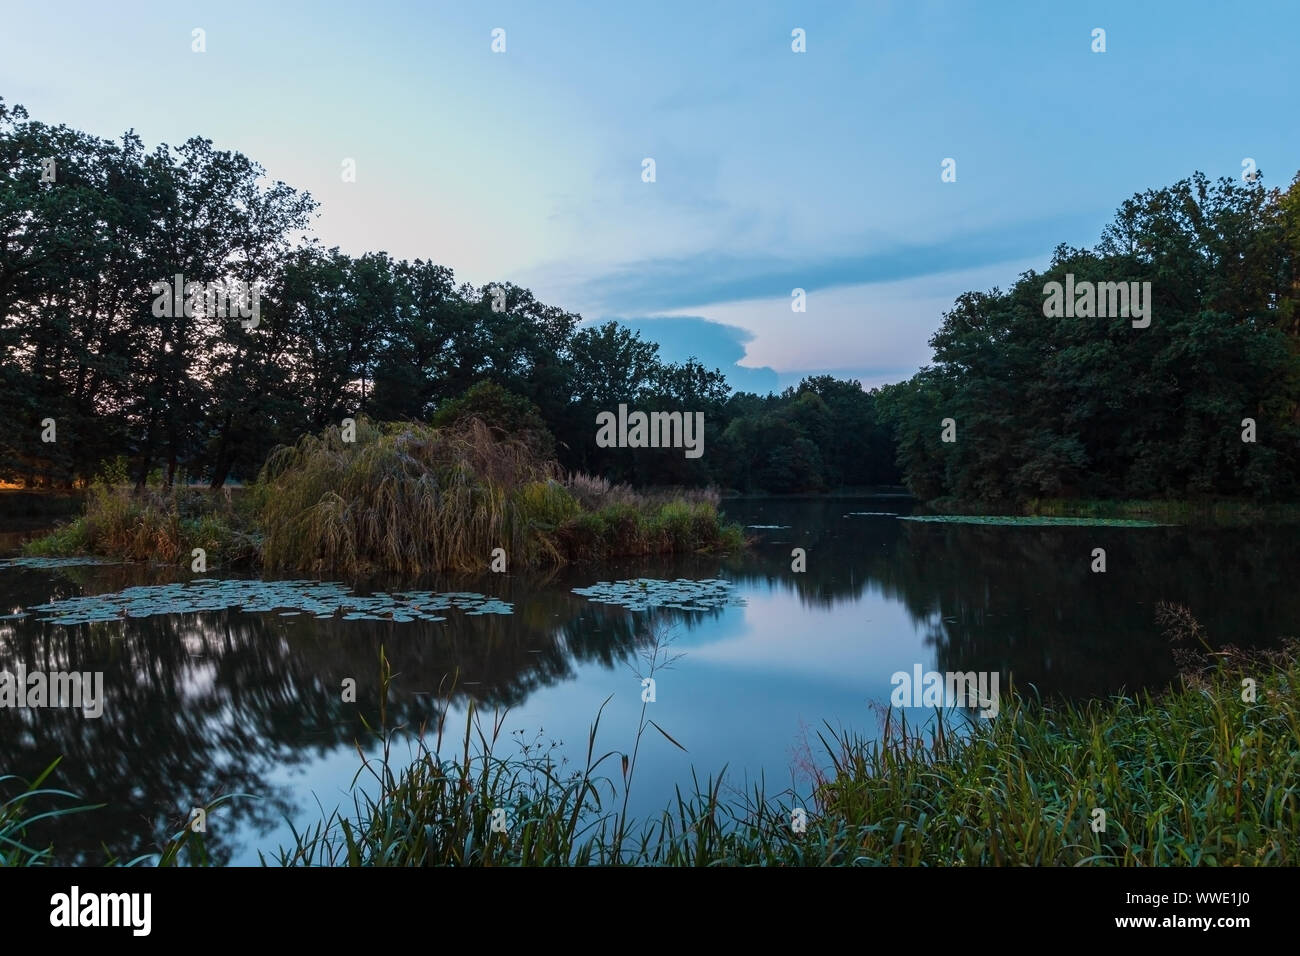 The lake in Poland in the evening. Stock Photo